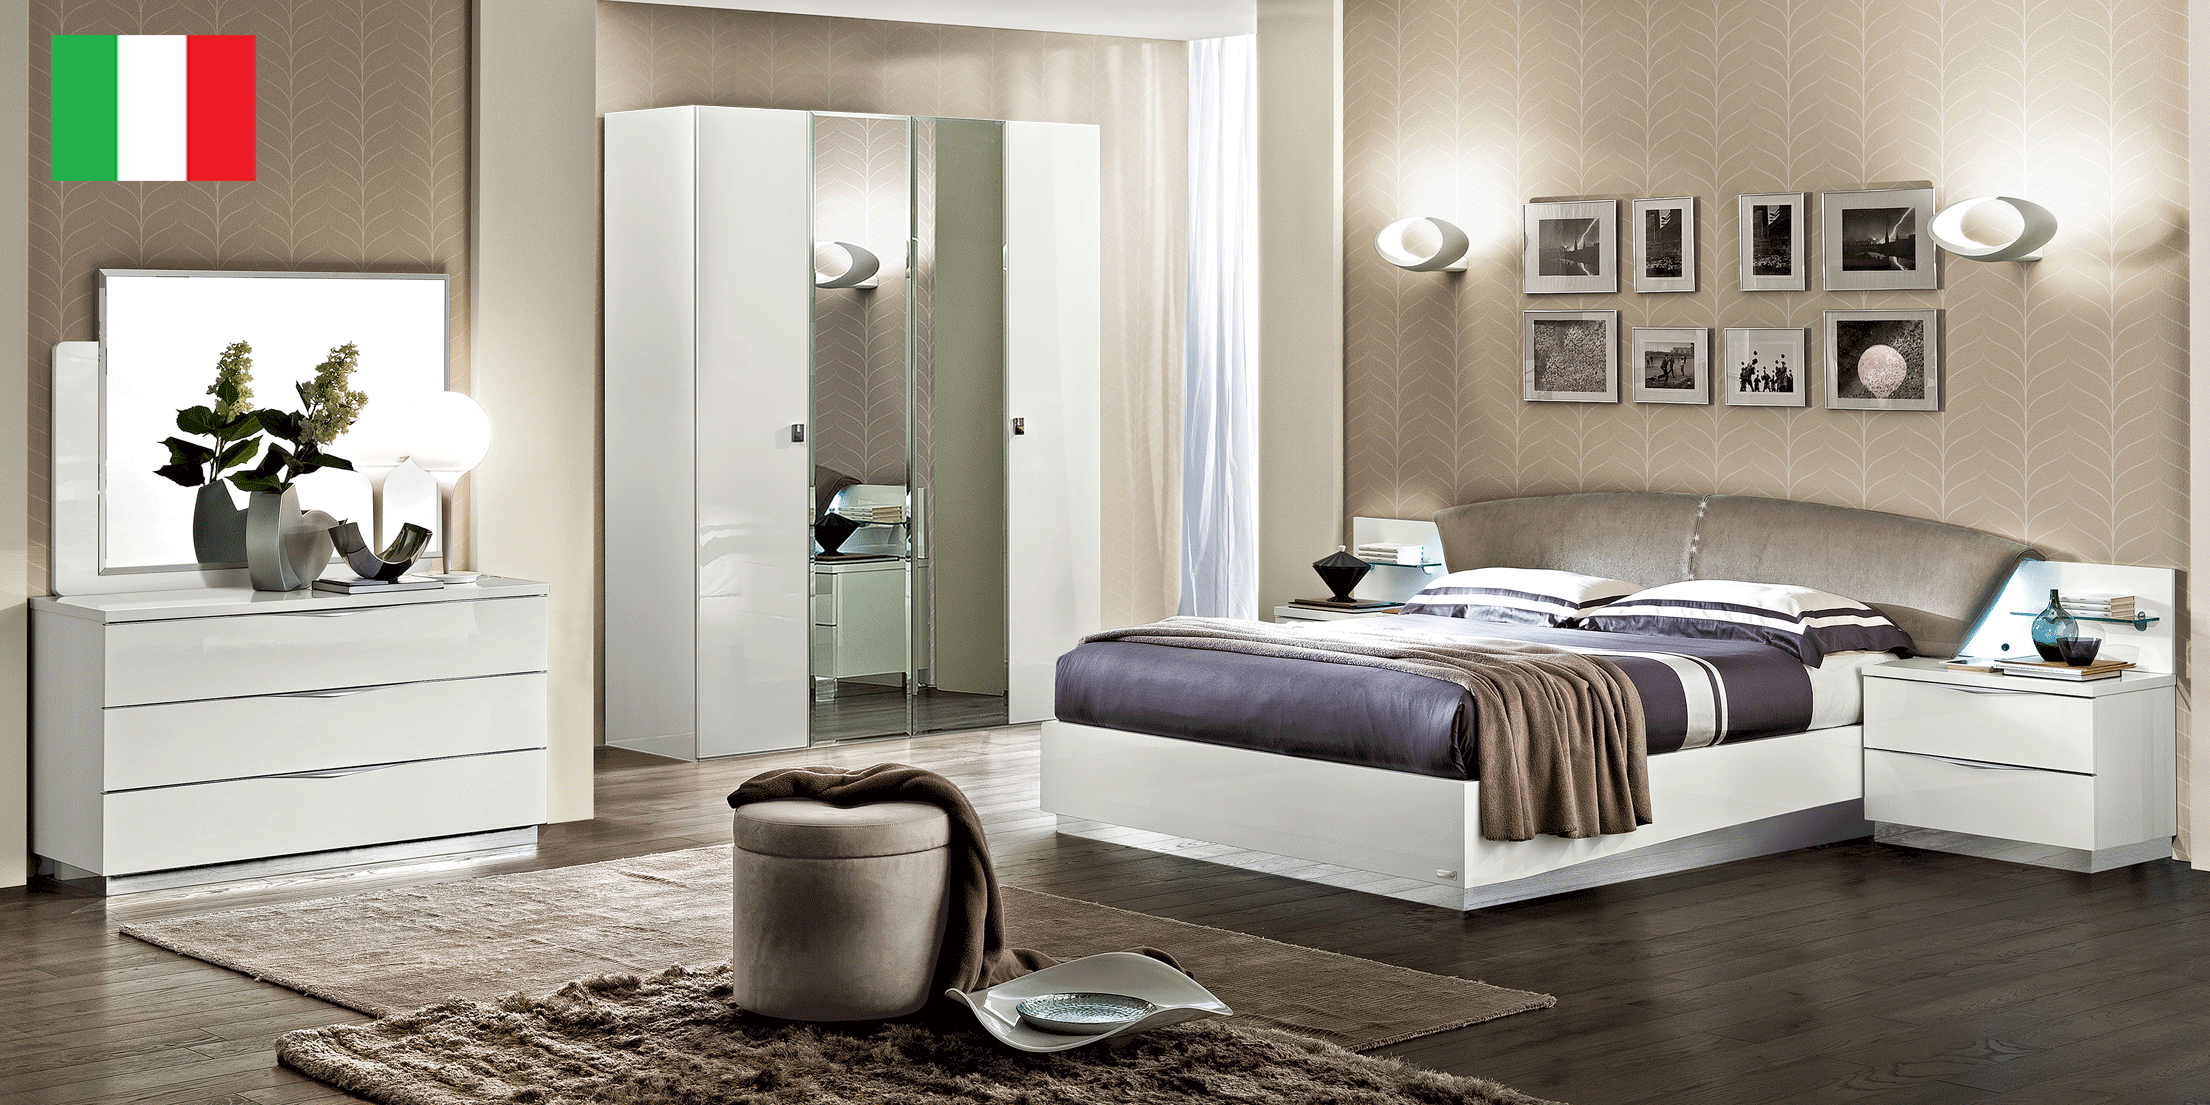 Wallunits Hallway Console tables and Mirrors Onda DROP Bedroom WHITE